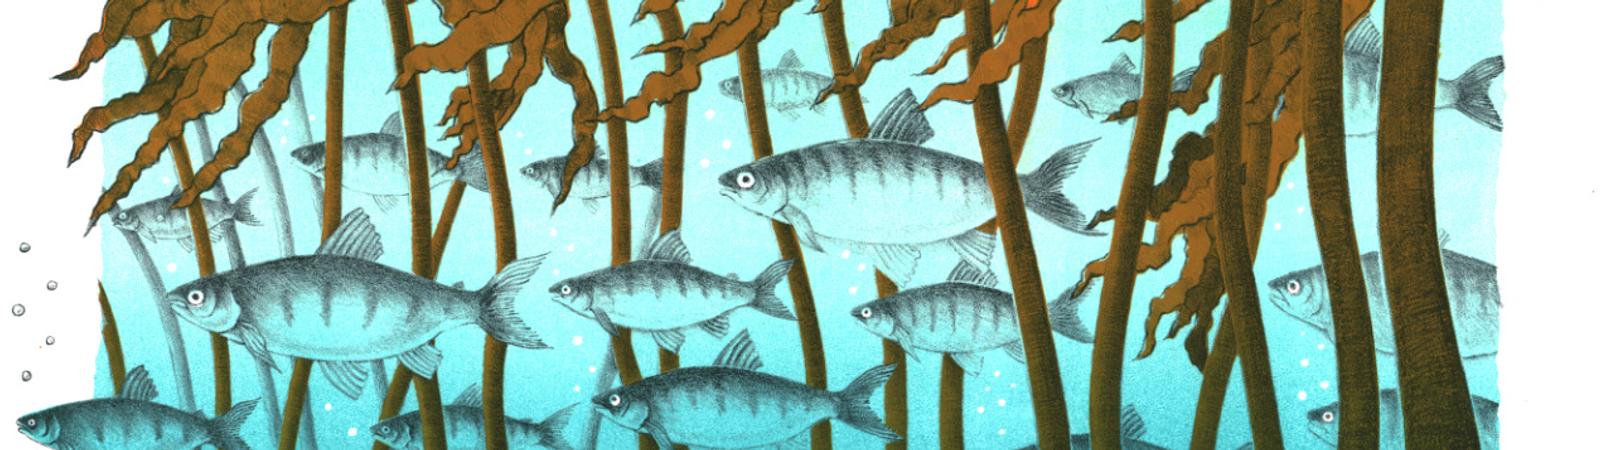 Gini Wade, Fish Forest, 2020